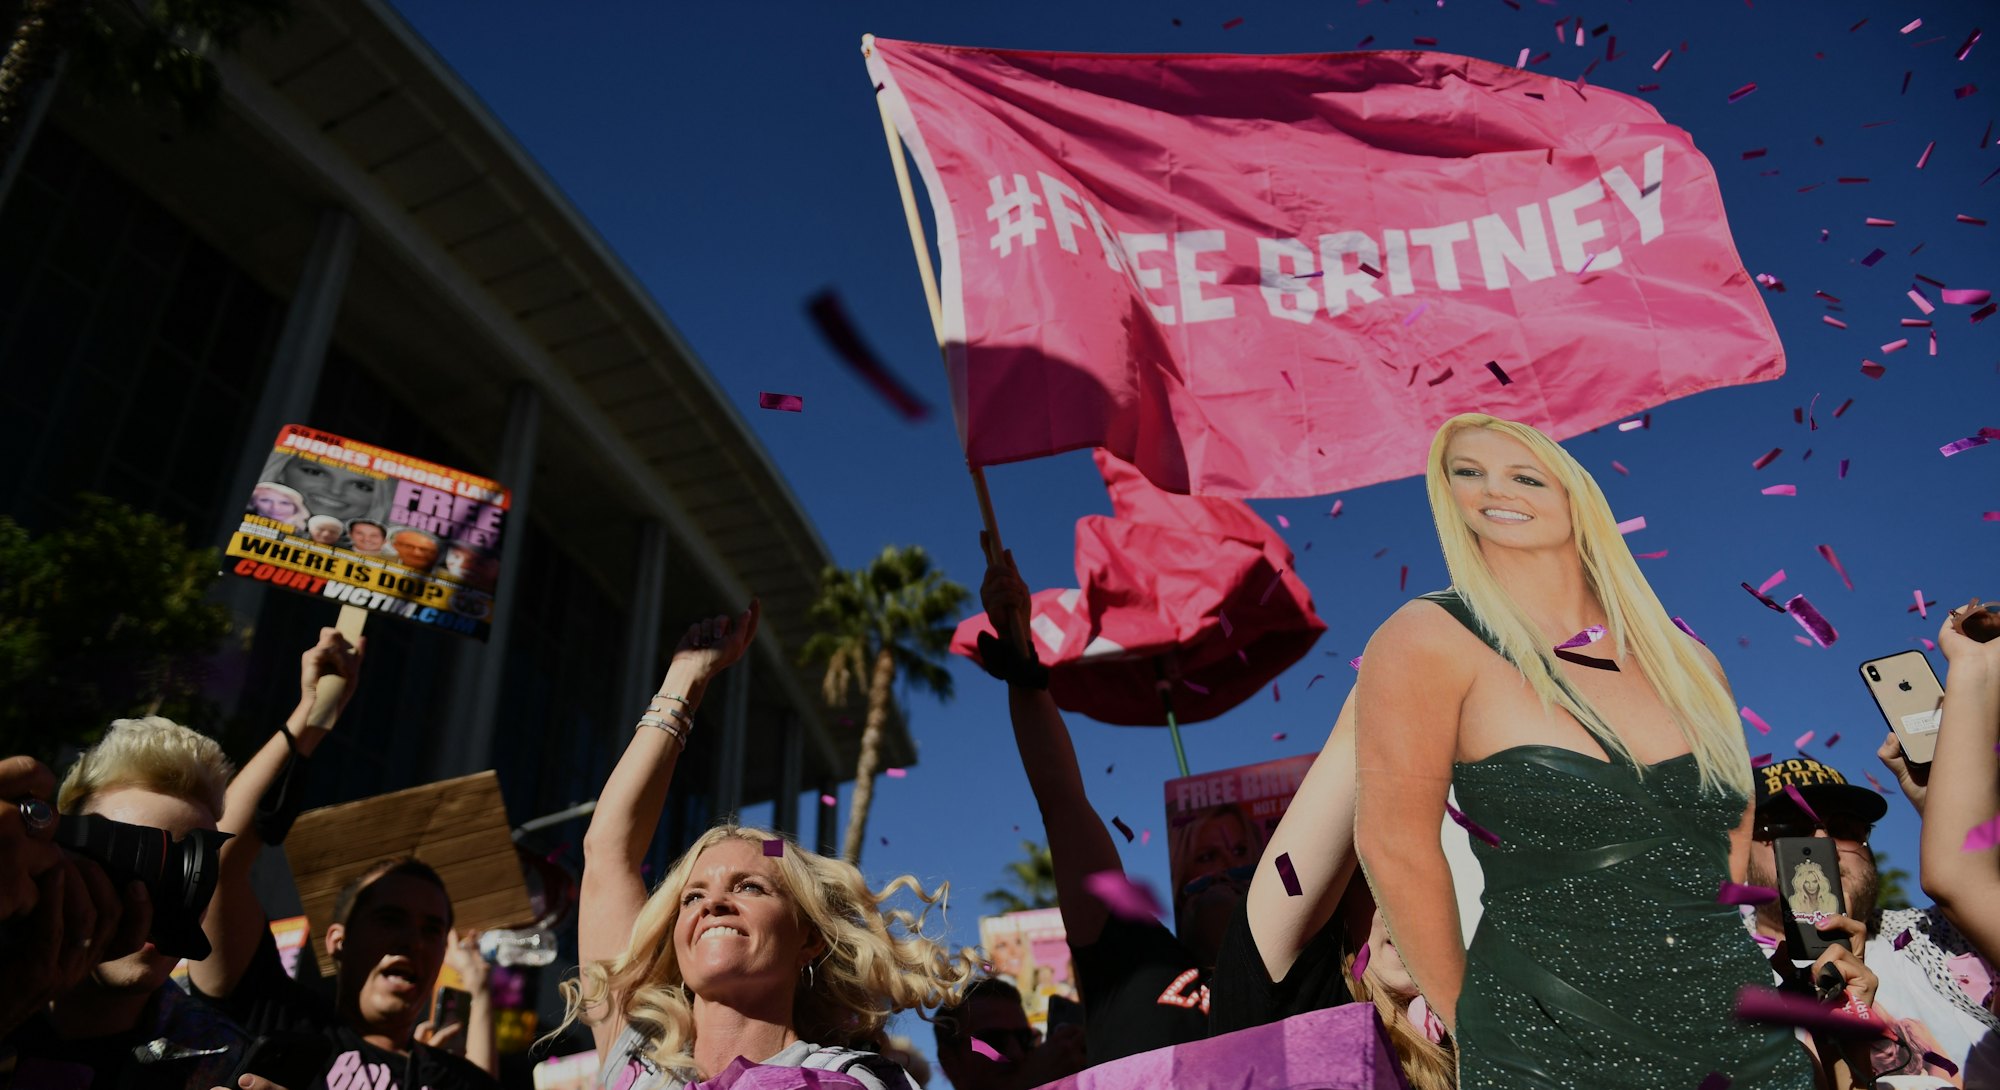 TOPSHOT - Supporters of the FreeBritney movement rally in support of musician Britney Spears for a c...